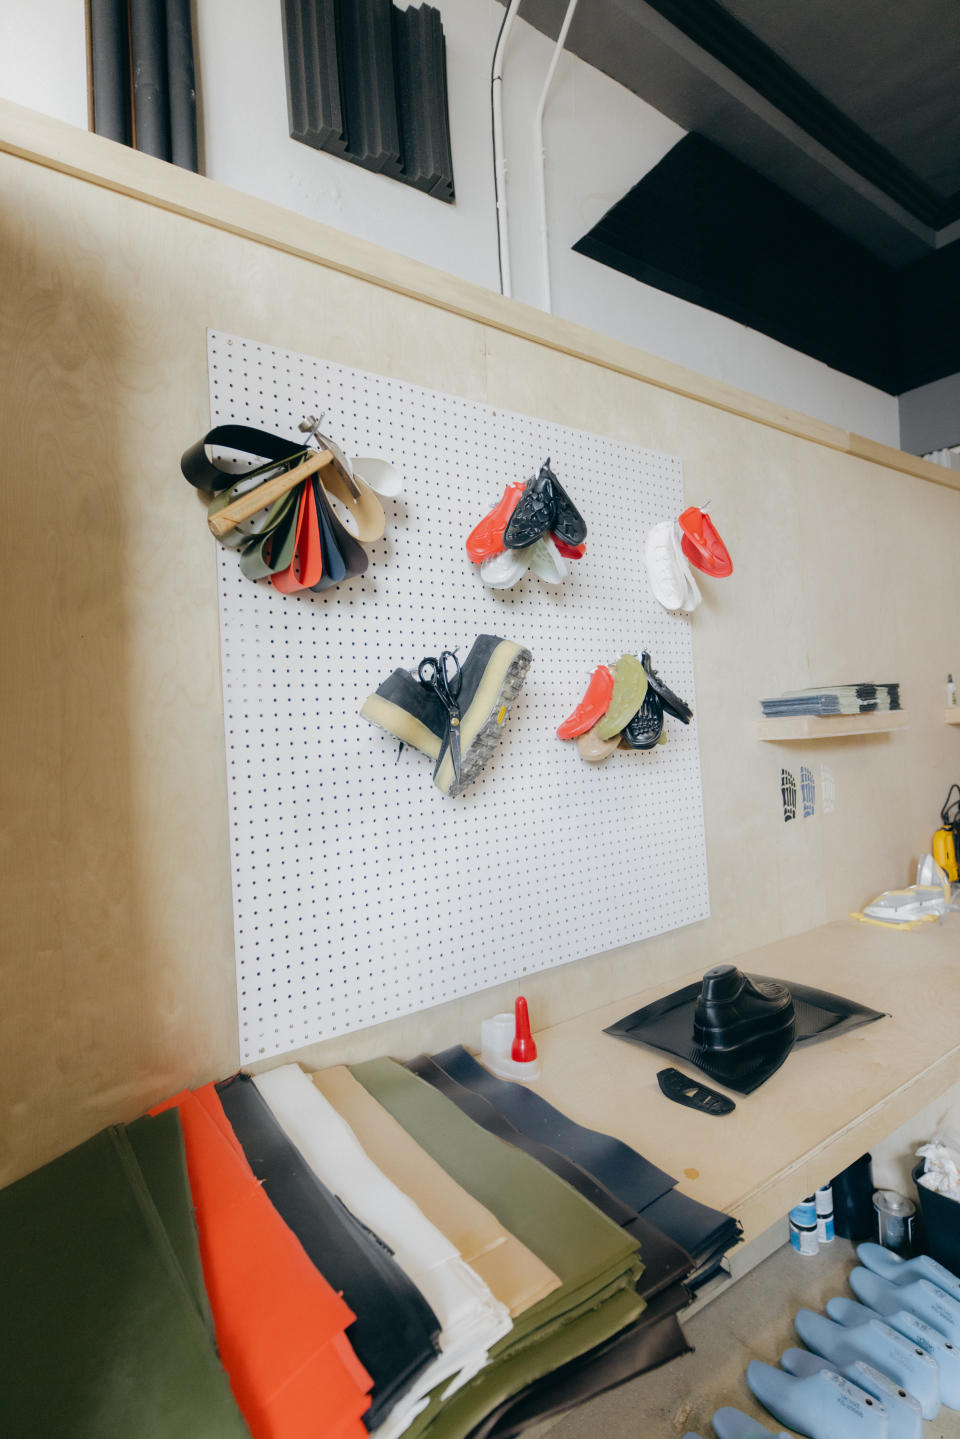 A look inside the Clarks Creates workshop.